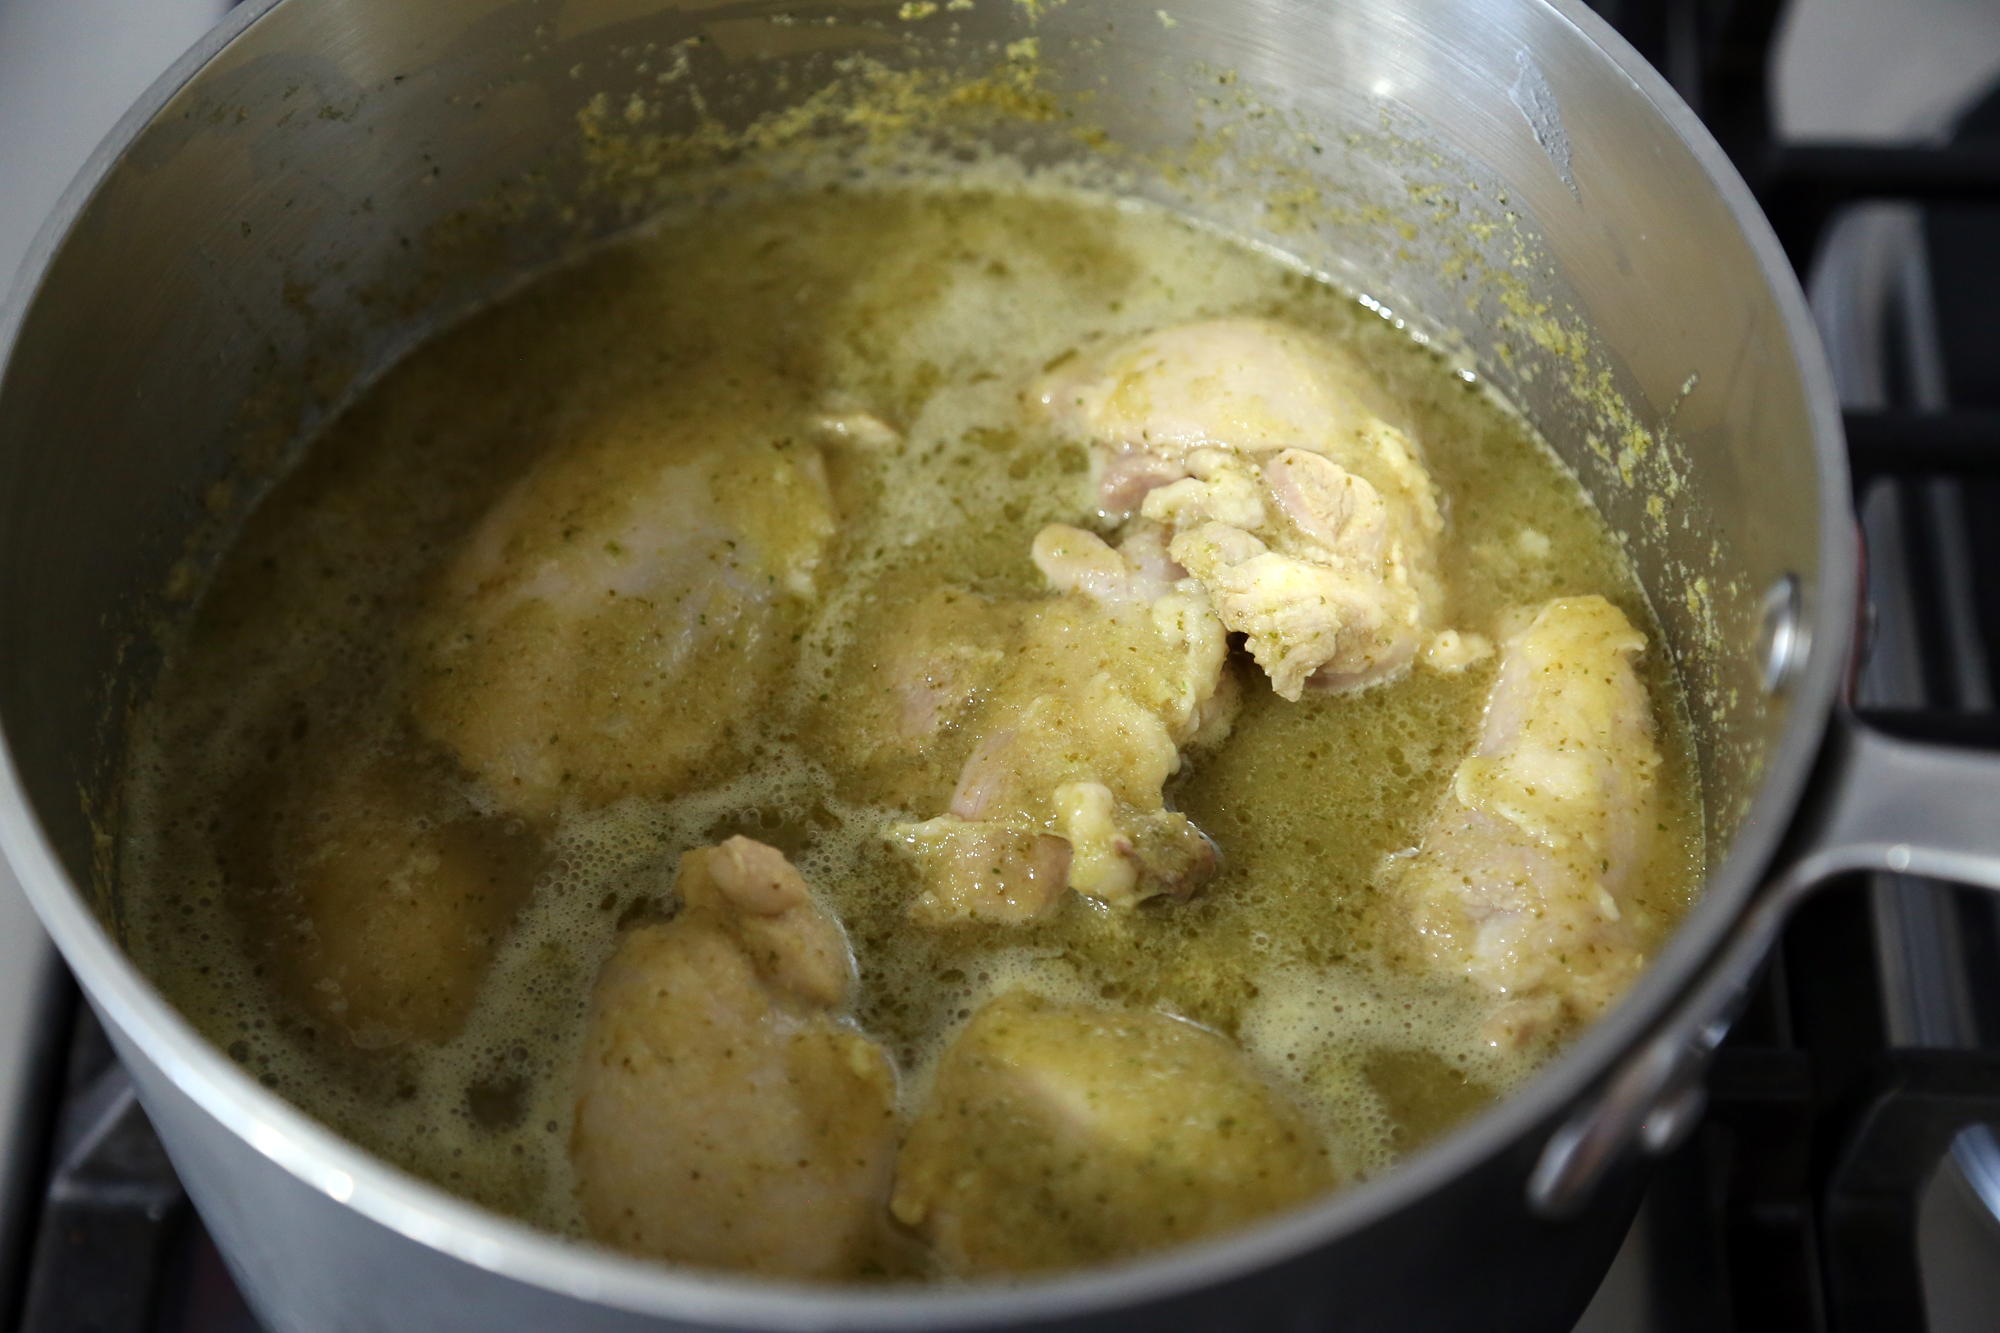 Cover partially and simmer until the chicken is very tender, about 20 minutes.